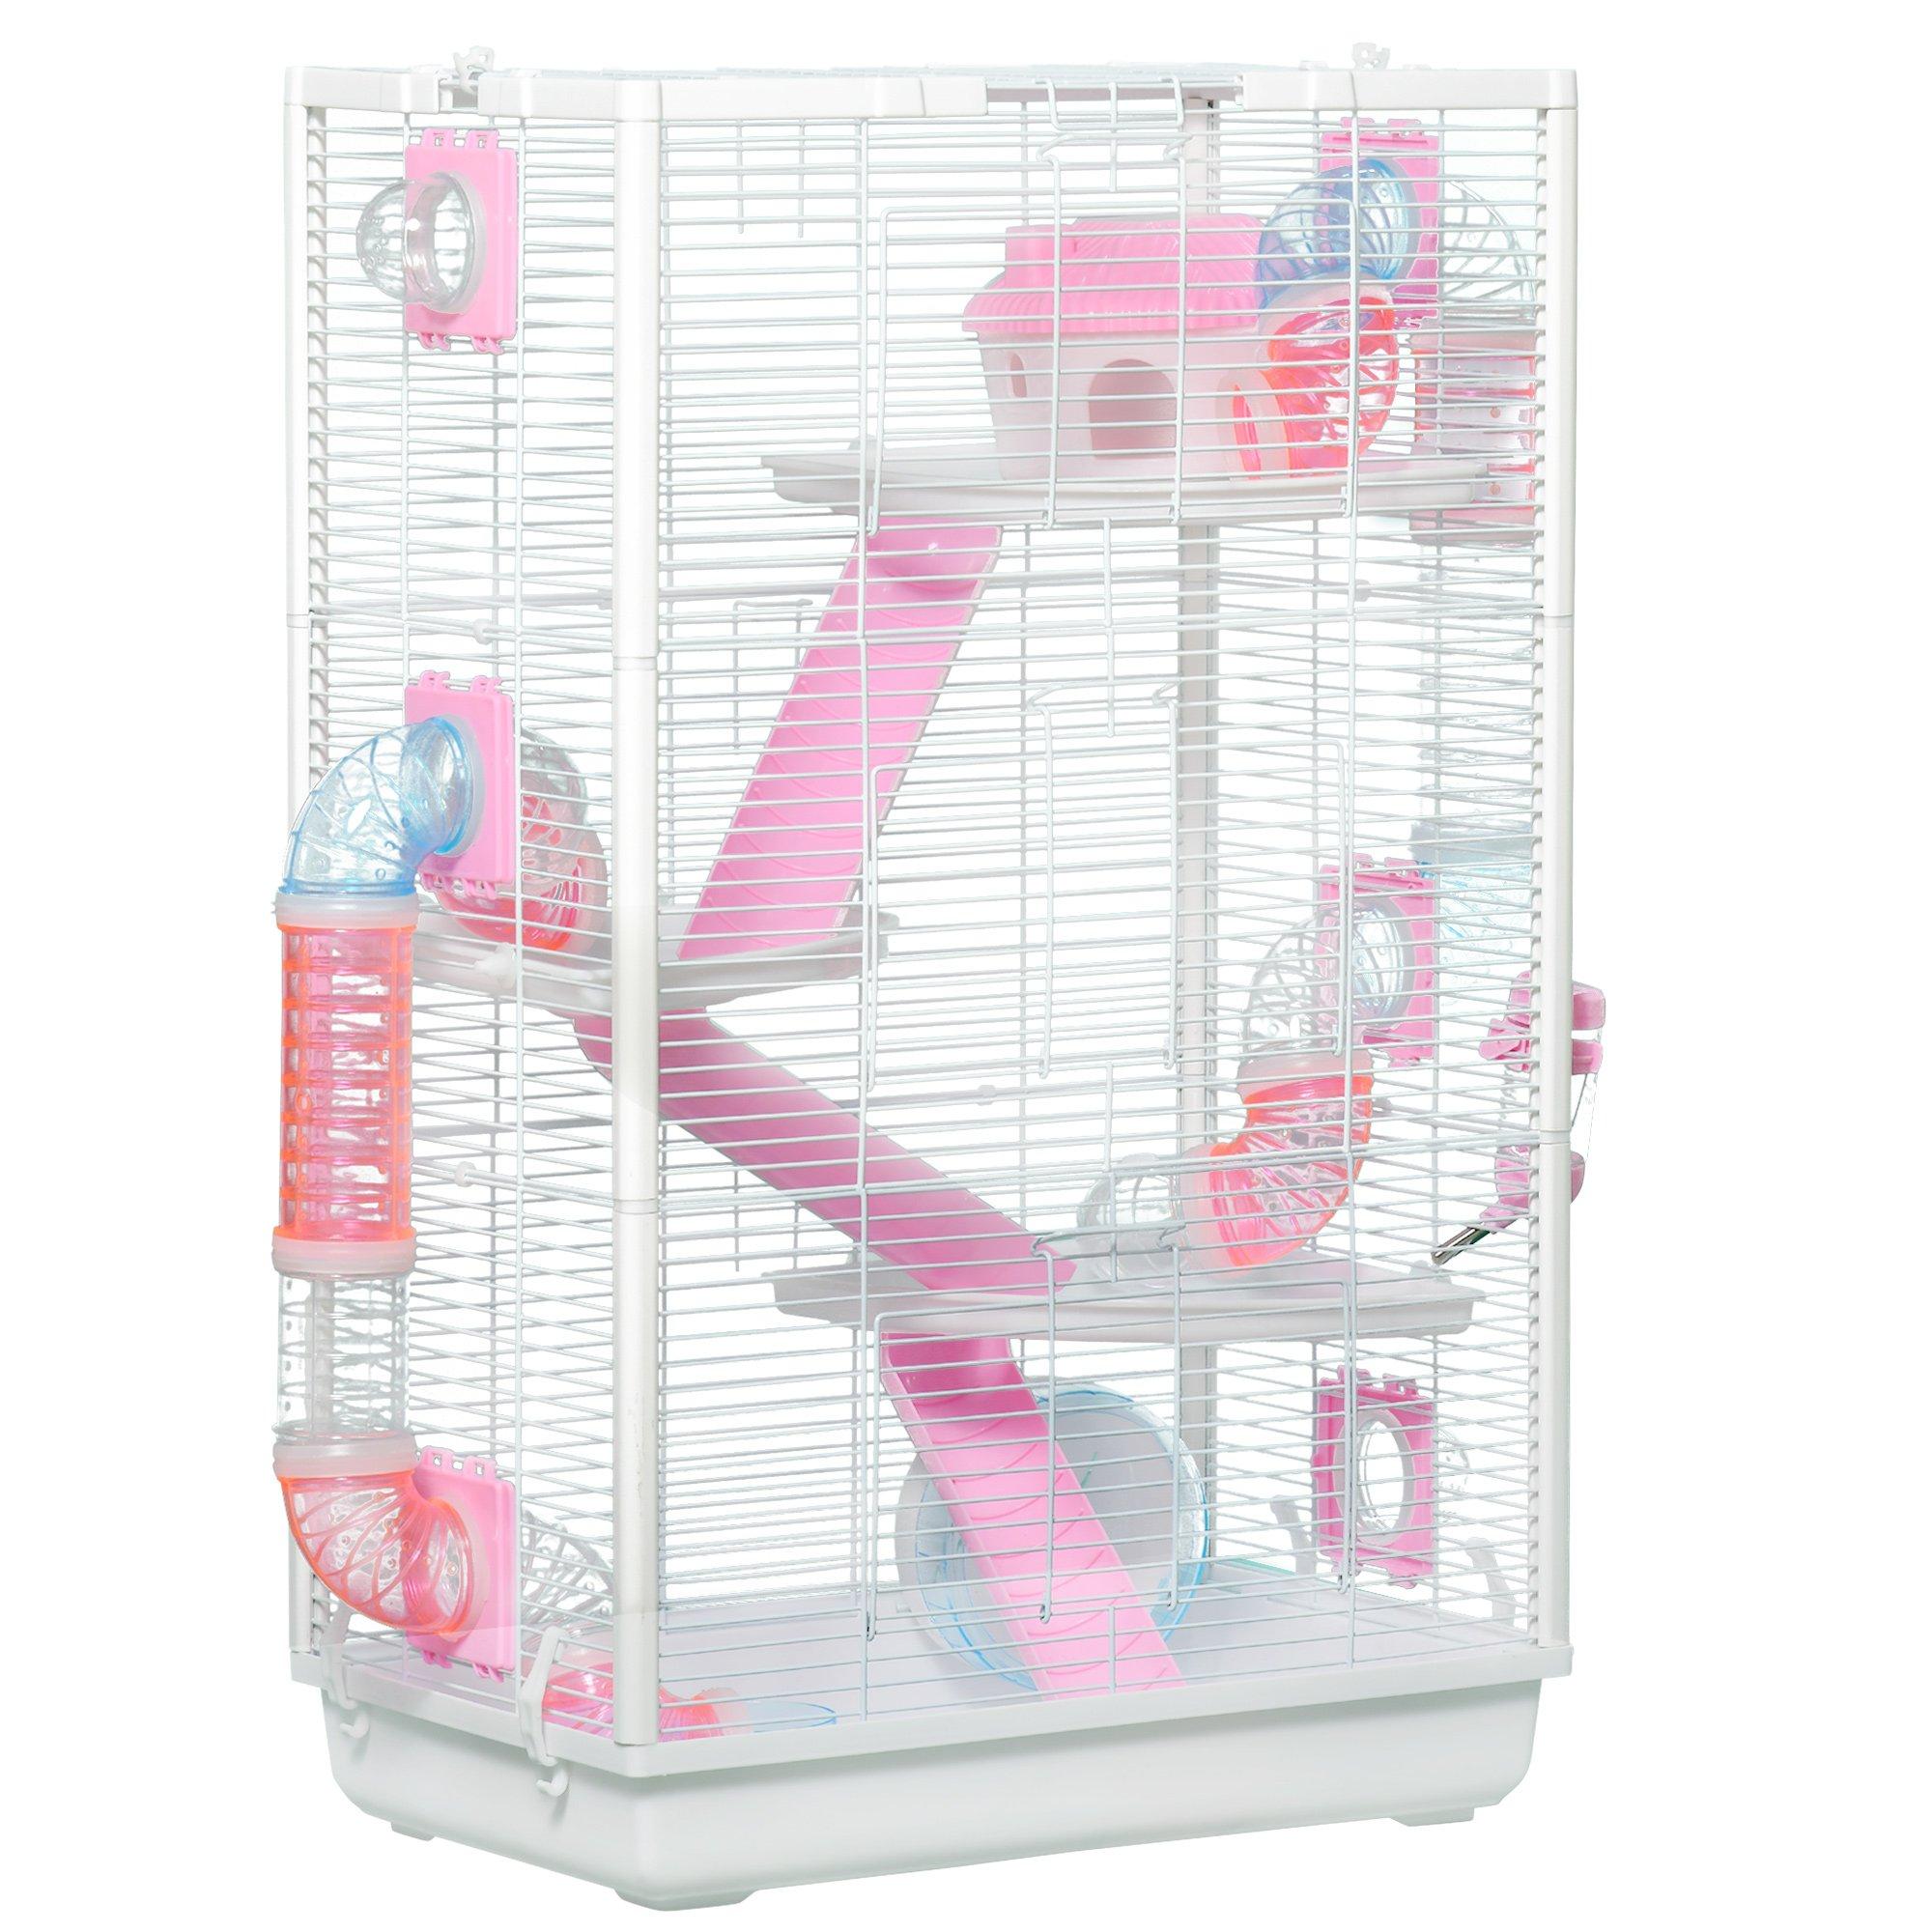 Hamster Cage for Small Rodents with Tunnel Tubes, Platforms, Hut